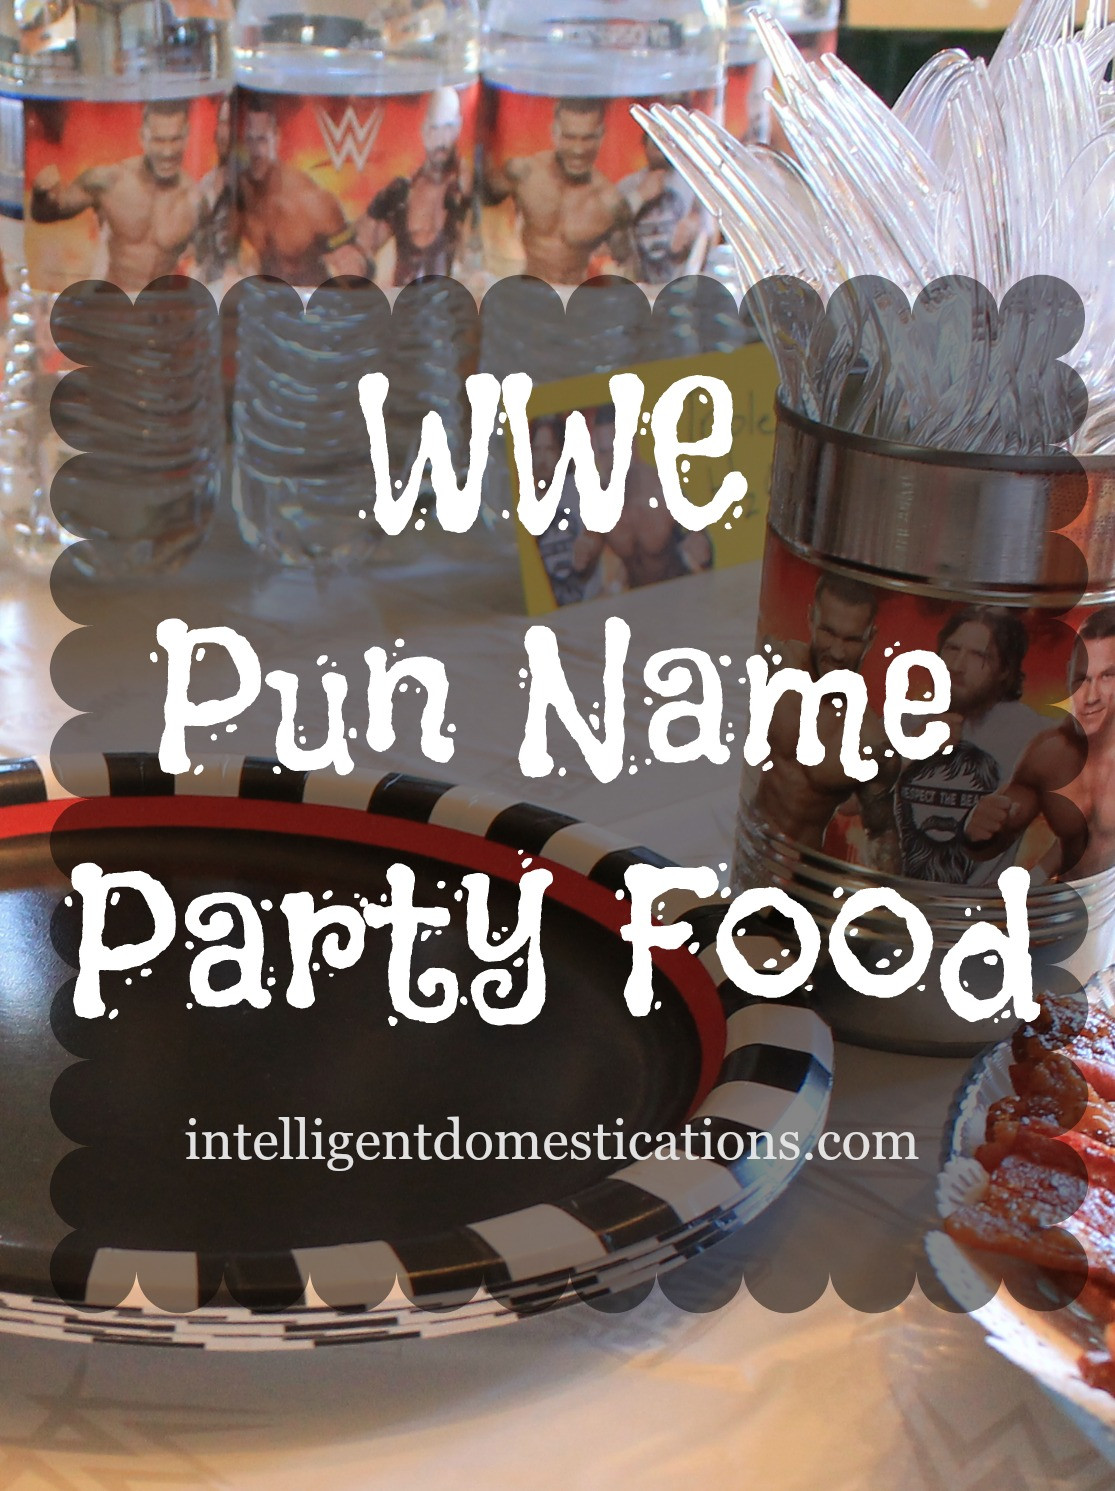 Funny Birthday Party Names
 WWE Party Food with Pun Names